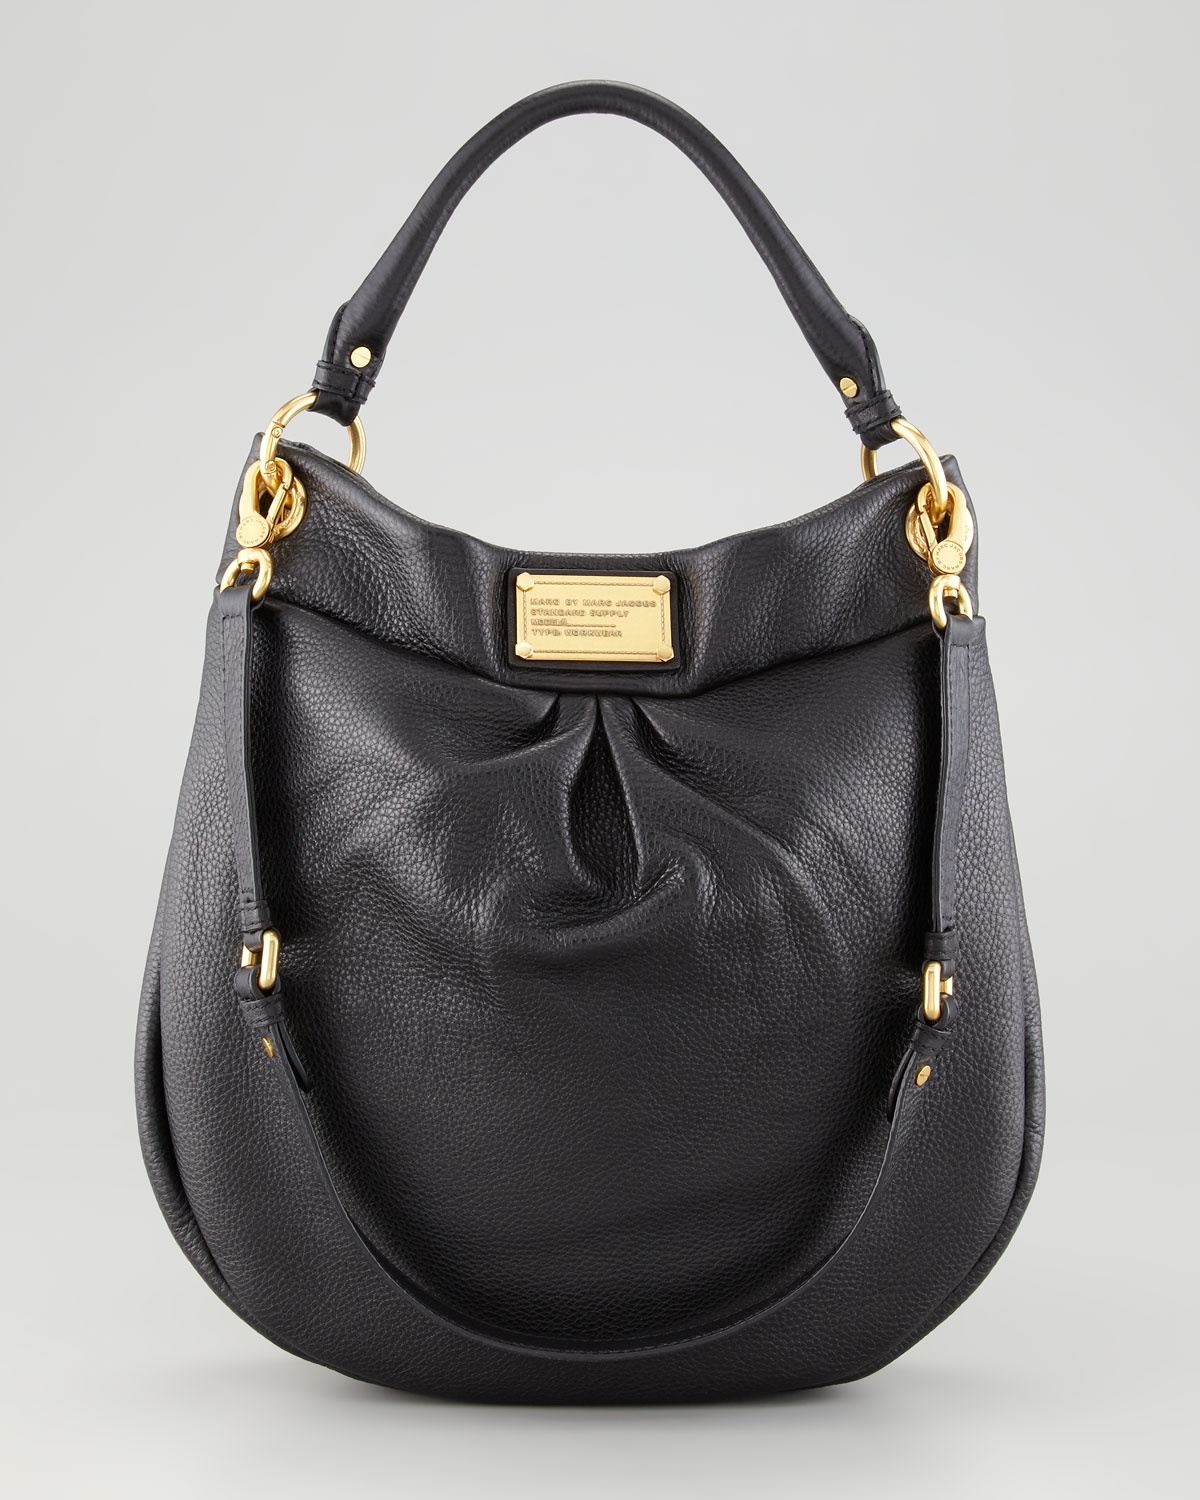 Lyst - Marc by marc jacobs Classic Q Hillier Hobo Bag Black in Black